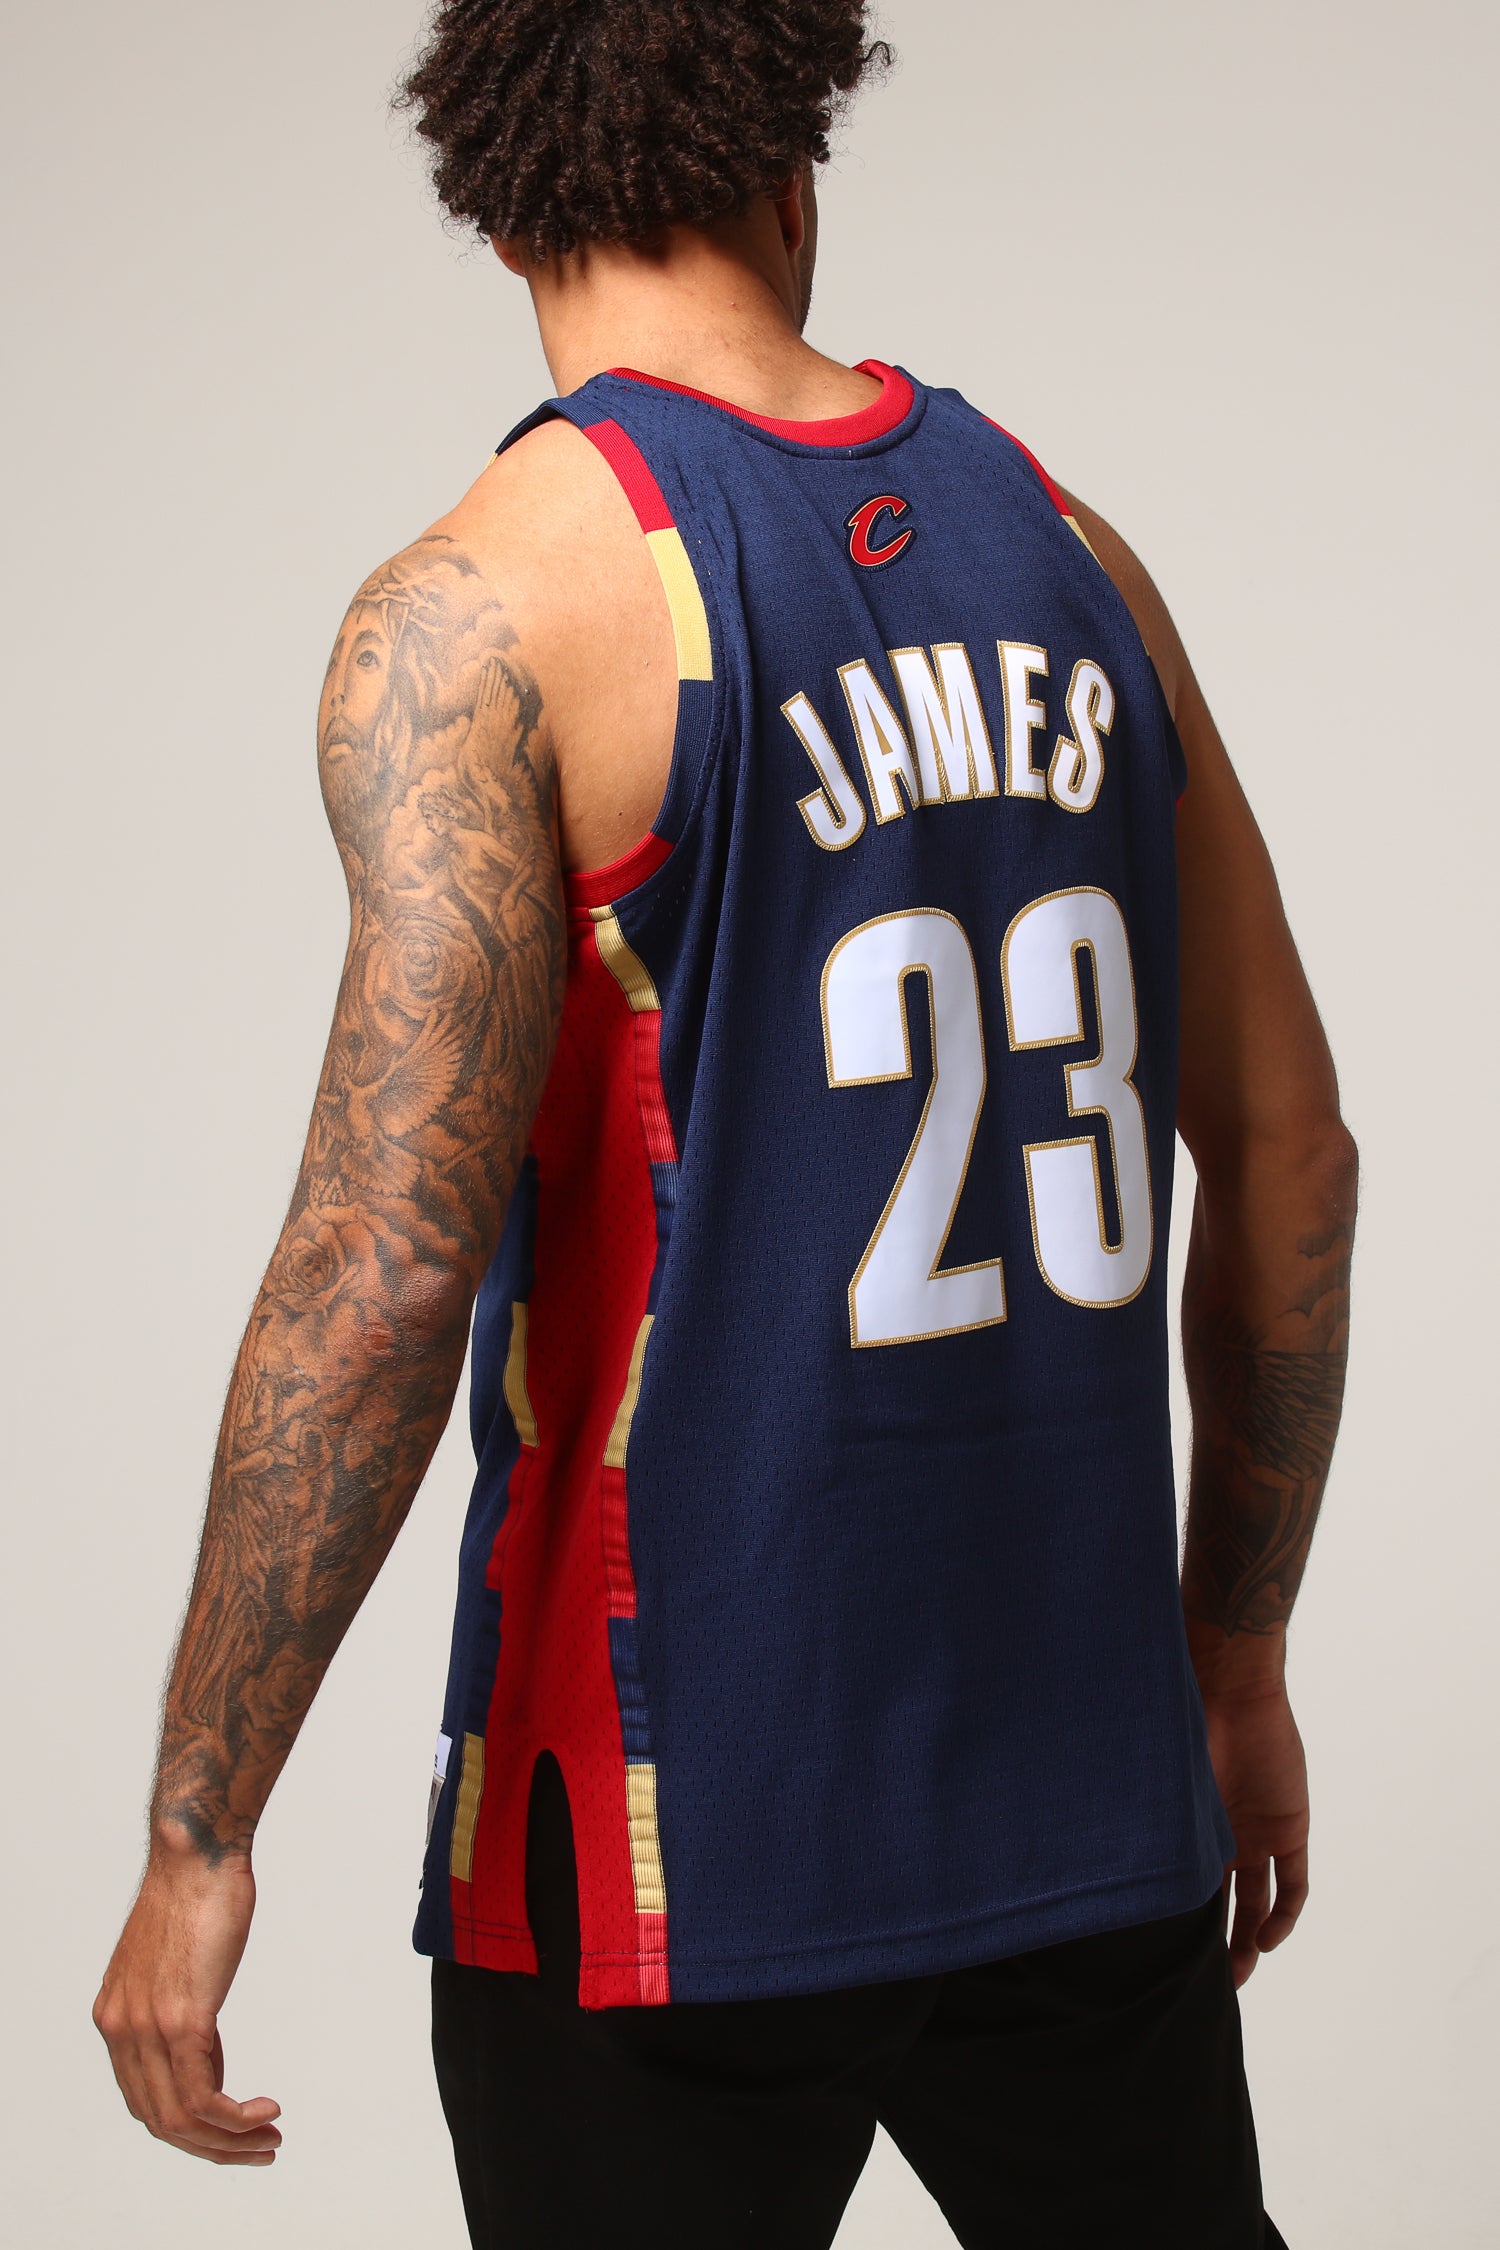 lebron james cavs jersey mitchell and ness